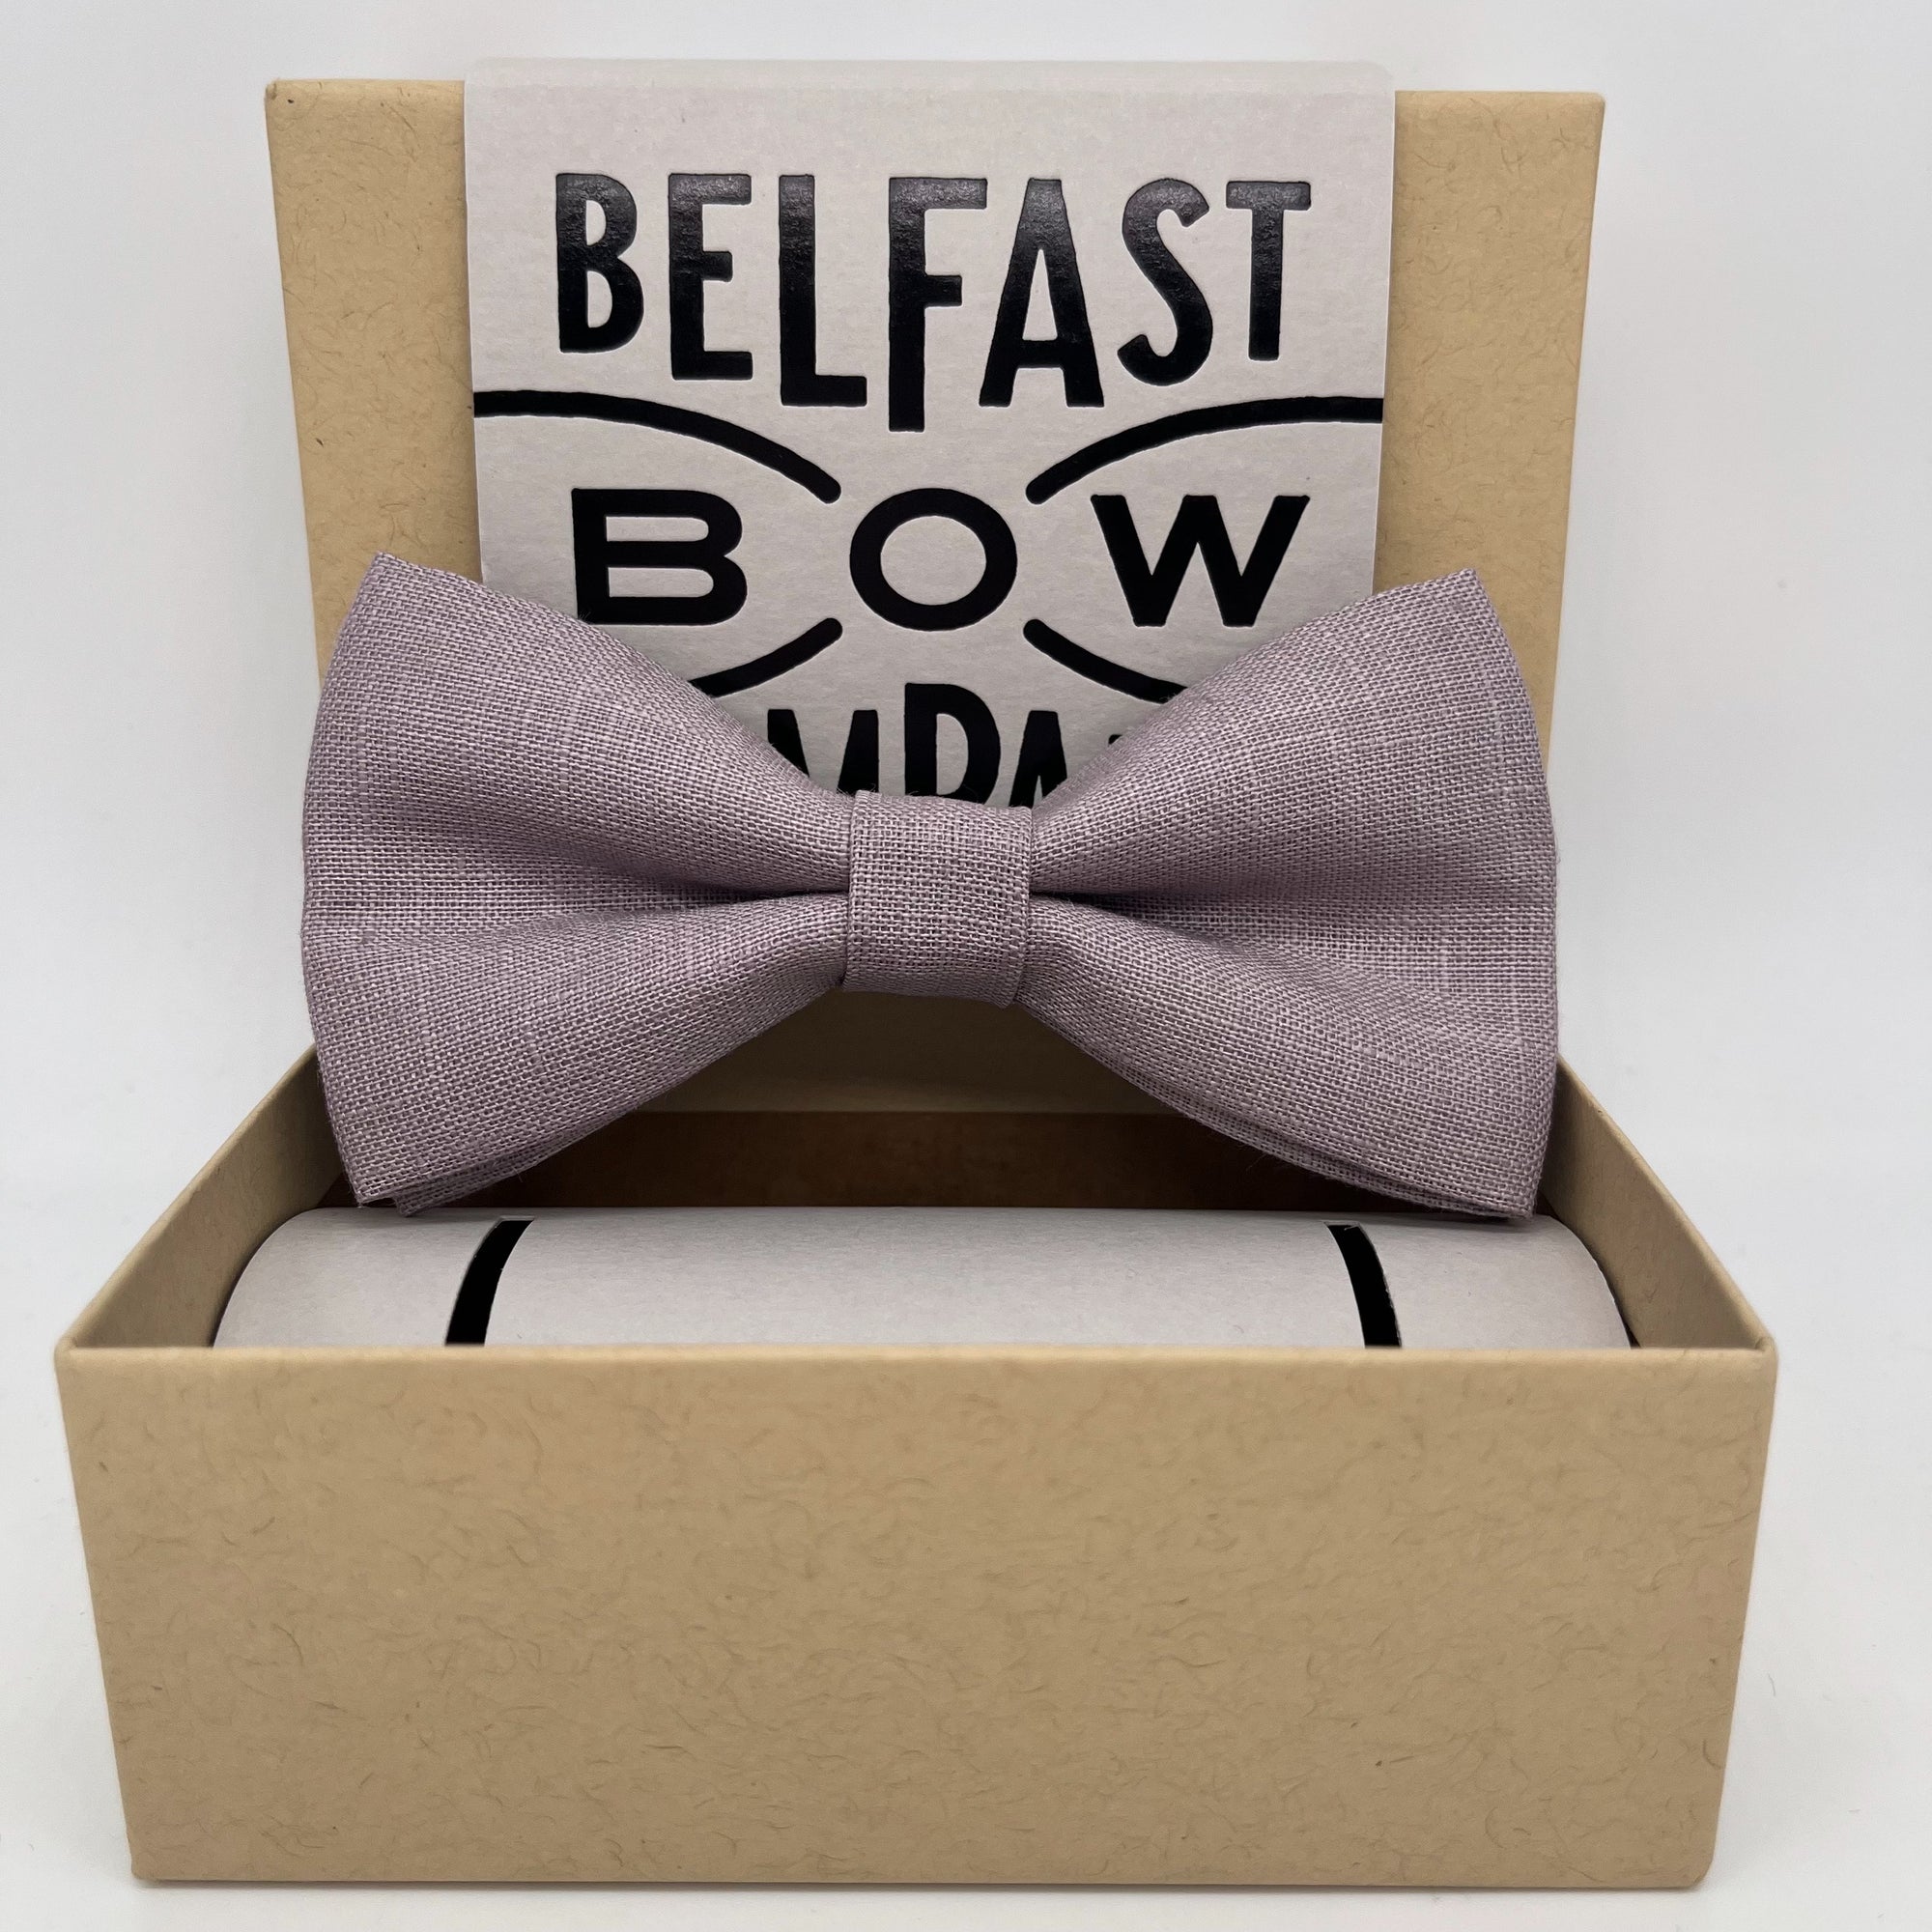 Mauve Lilac Bow Tie in Irish Linen by the Belfast Bow Company